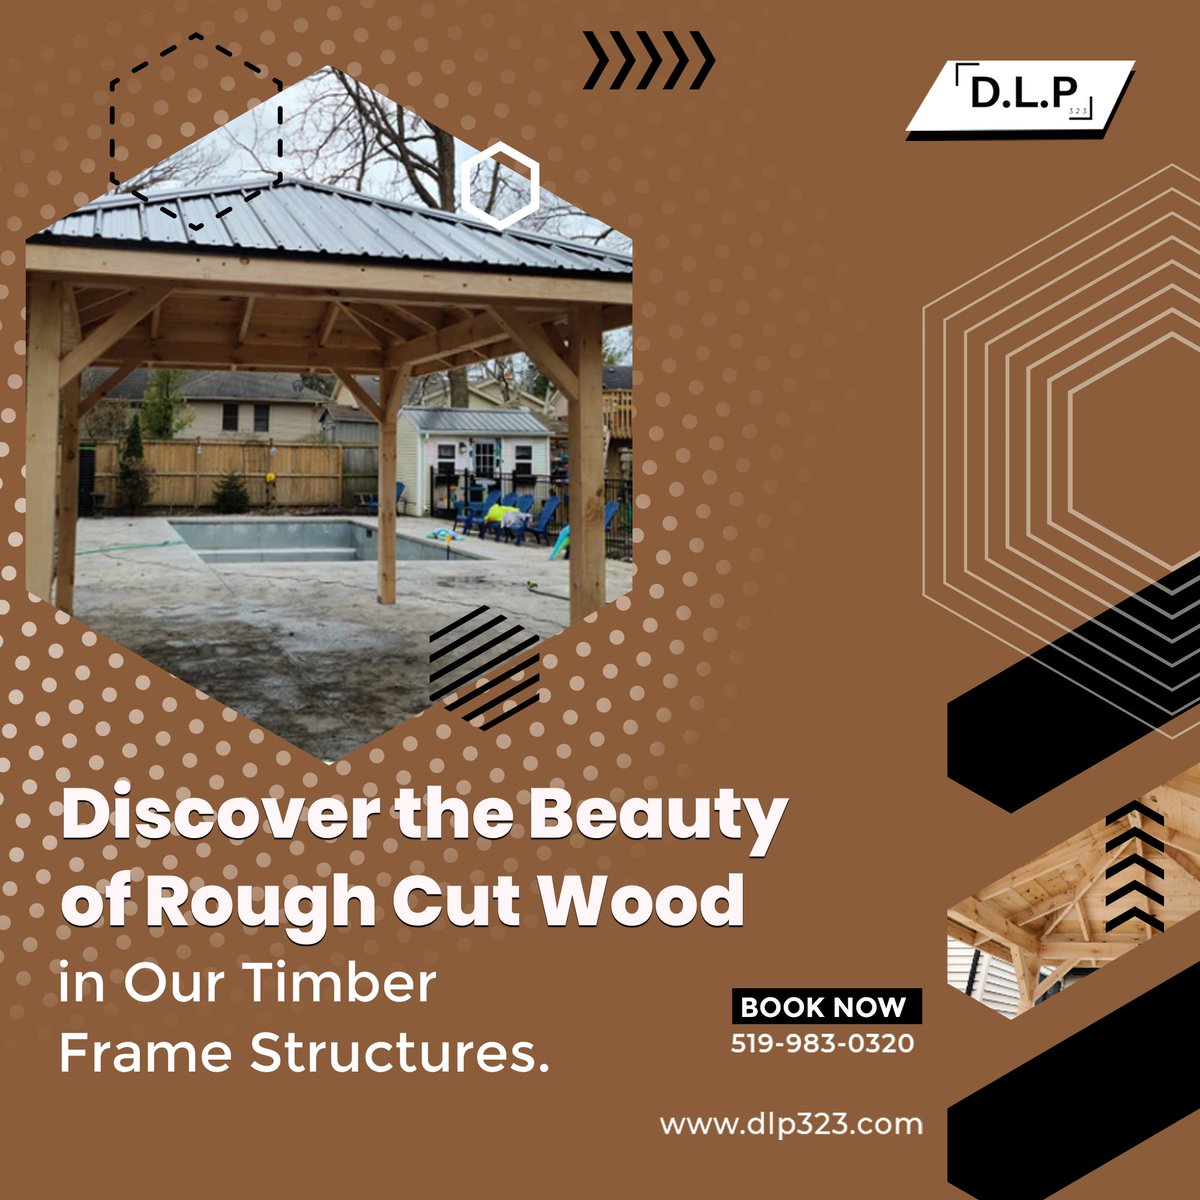 🌿 Unleash the Beauty of Rough Cut Wood 🌿

📞 Call us now at 519-983-0320 or 📧 Email us at info@dlp323.com for more information!

#TimberFrameBeauty
#RoughCutWoodCharm
#NaturalElegance
#TimelessTimberFrames
#HomeDesignInspo